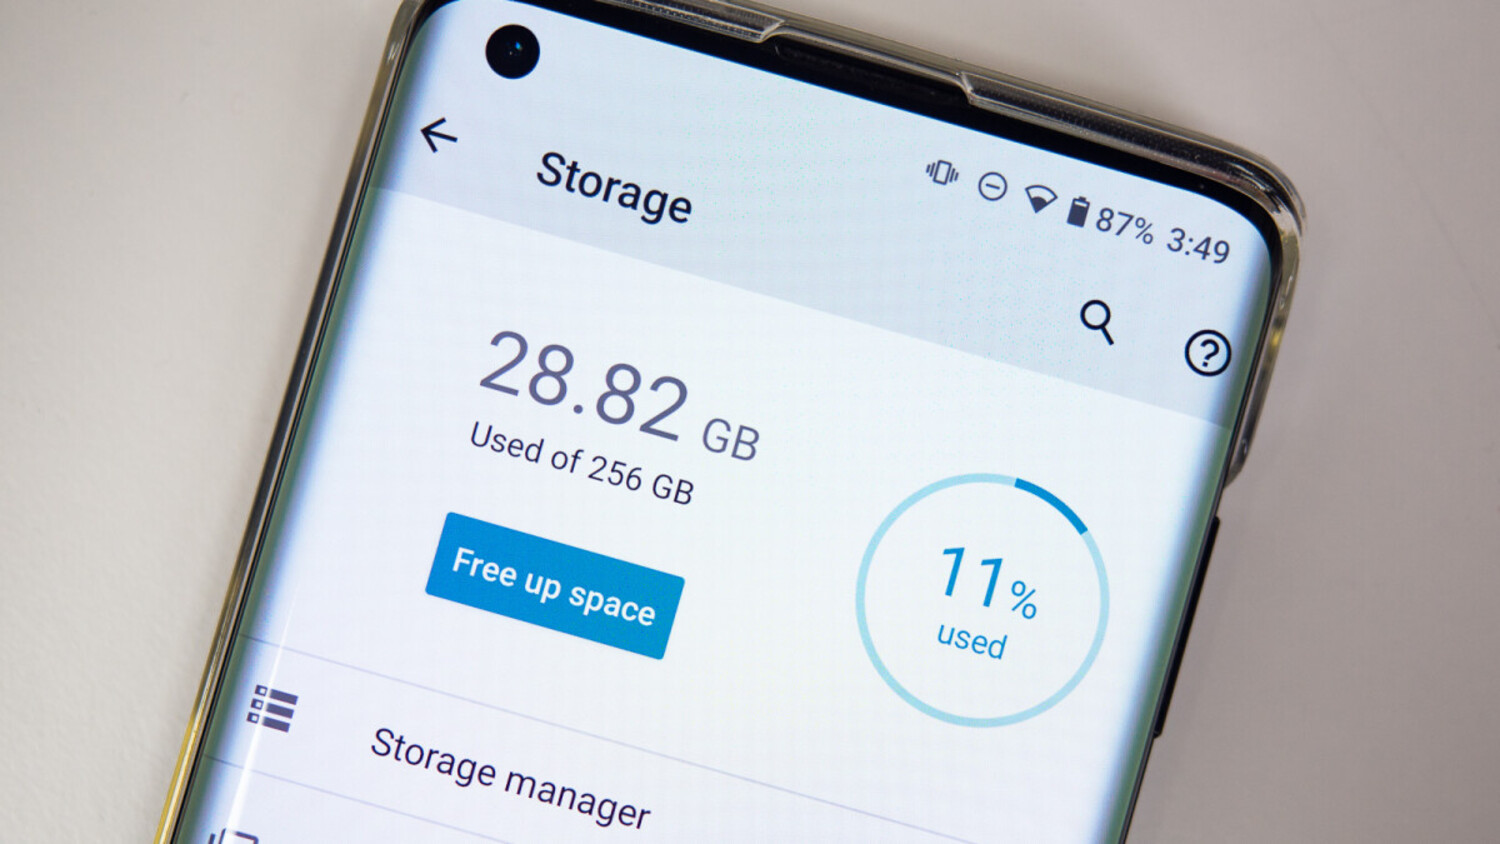 Free up Storage in your device